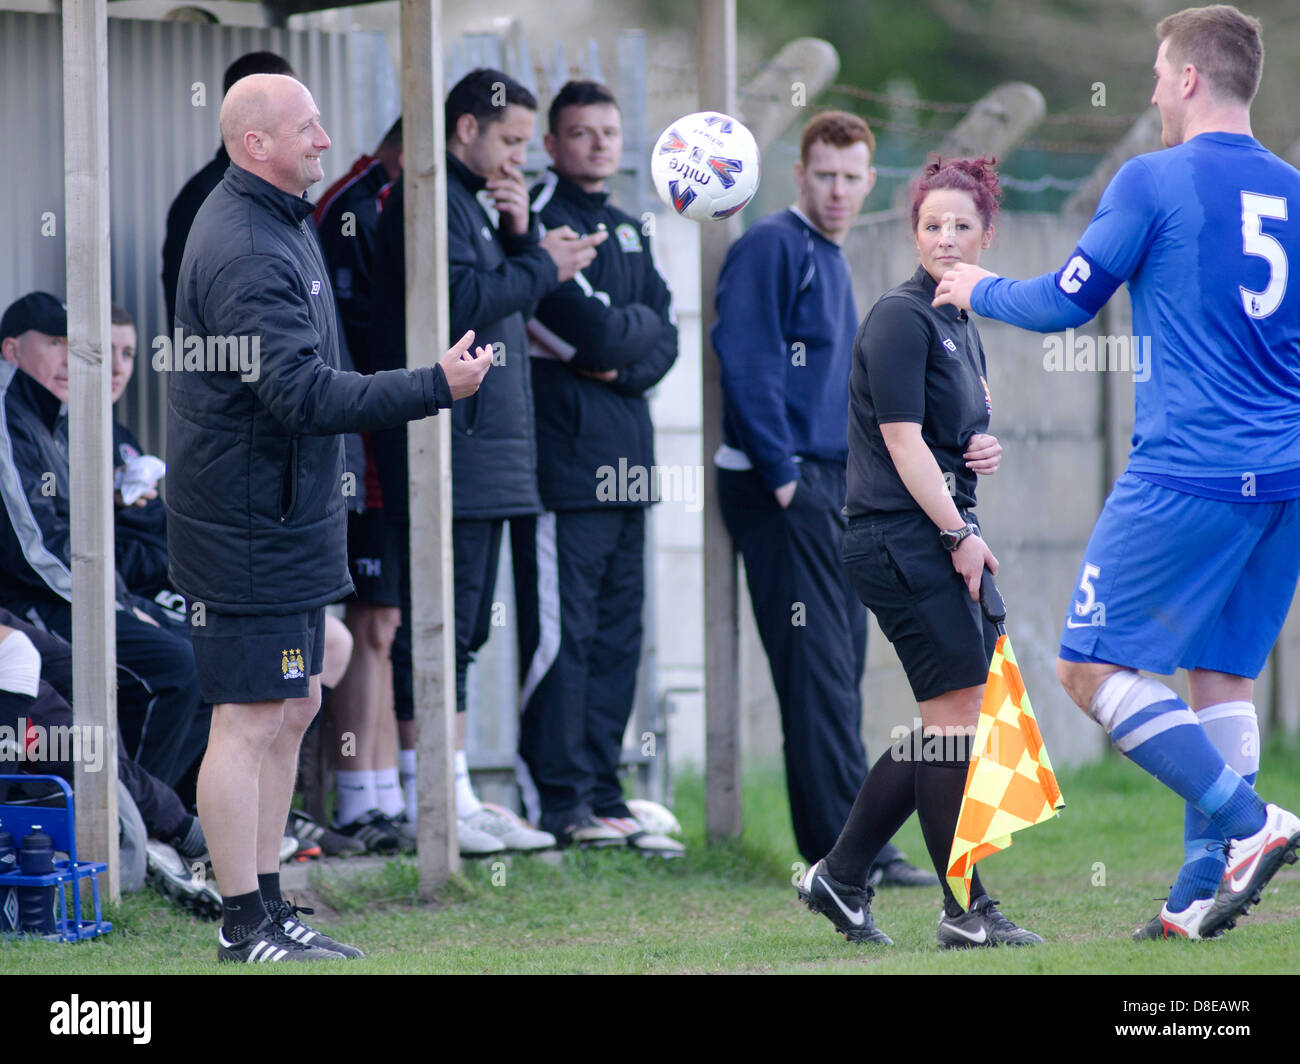 A football coach throws the ball back to an opposition player while a female linesman watches Stock Photo